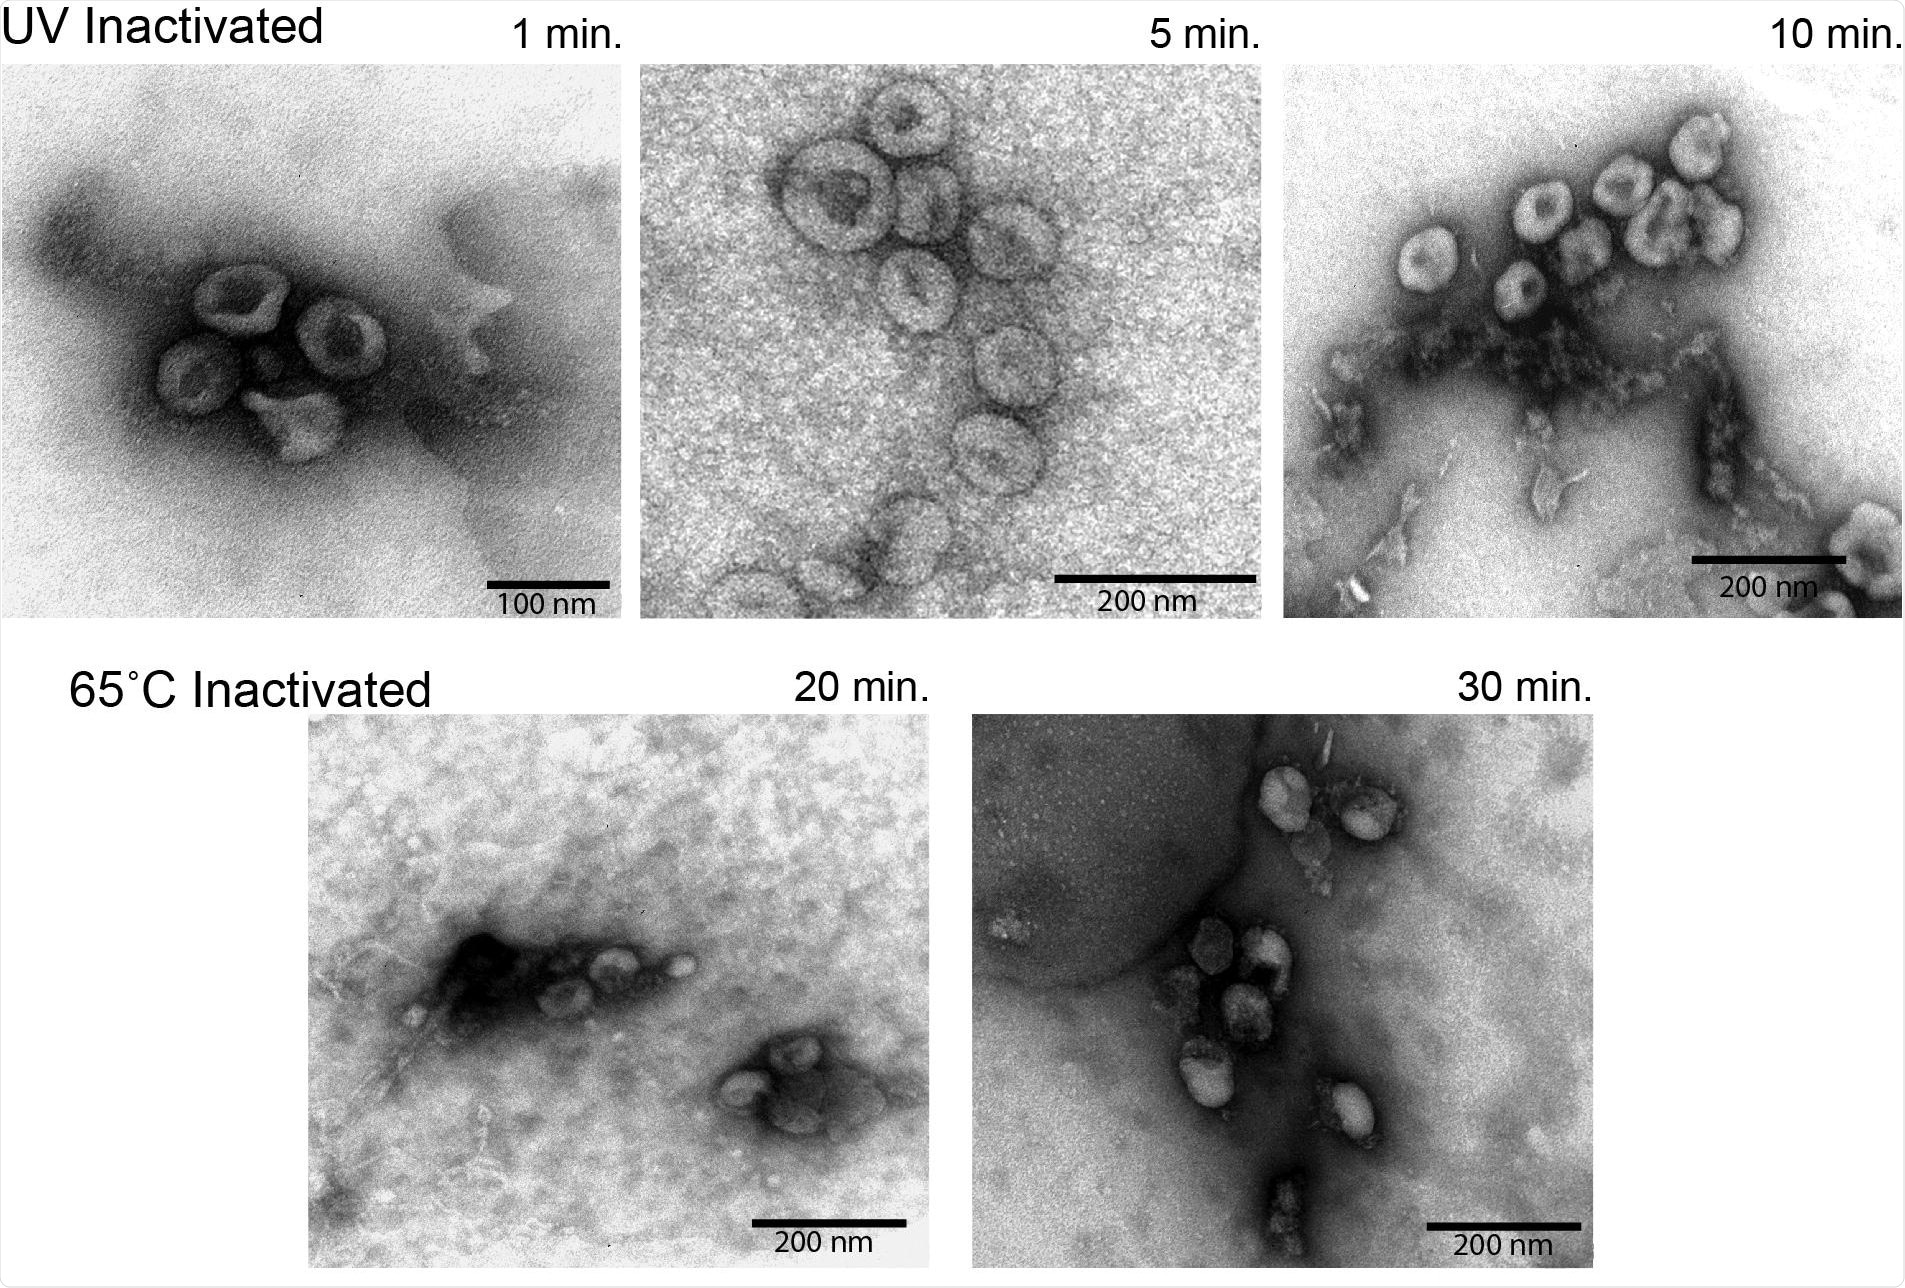 Electron microscopy analysis of virion morphology Semi-purified virion preparations were spotted onto a grid and imaged to assess virion morphology. The top row of images was taken from UV inactivated samples. The bottom row of images was taken from heat inactivated samples. Relative size is indicated by the scale bar in the lower corner of each image.